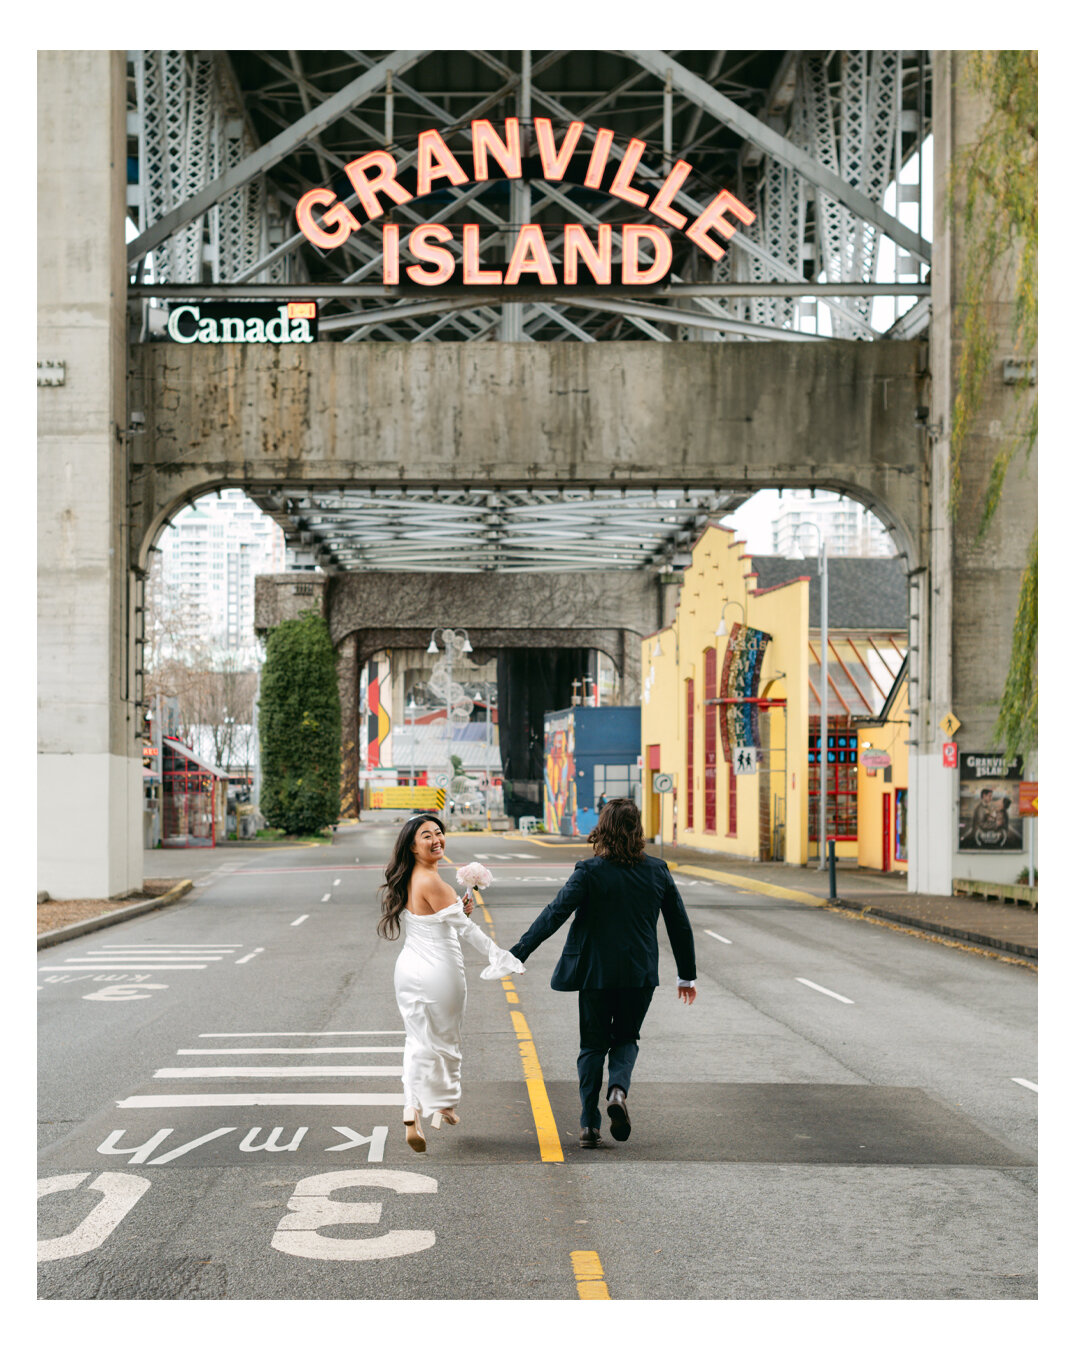 POV - You had Granville Island all to yourself for a January elopement with your favourite people 😘

Tiffany and Jake! Go check your emails! 😍

#yayloveweddingphotography
#vancouverweddingphotographer